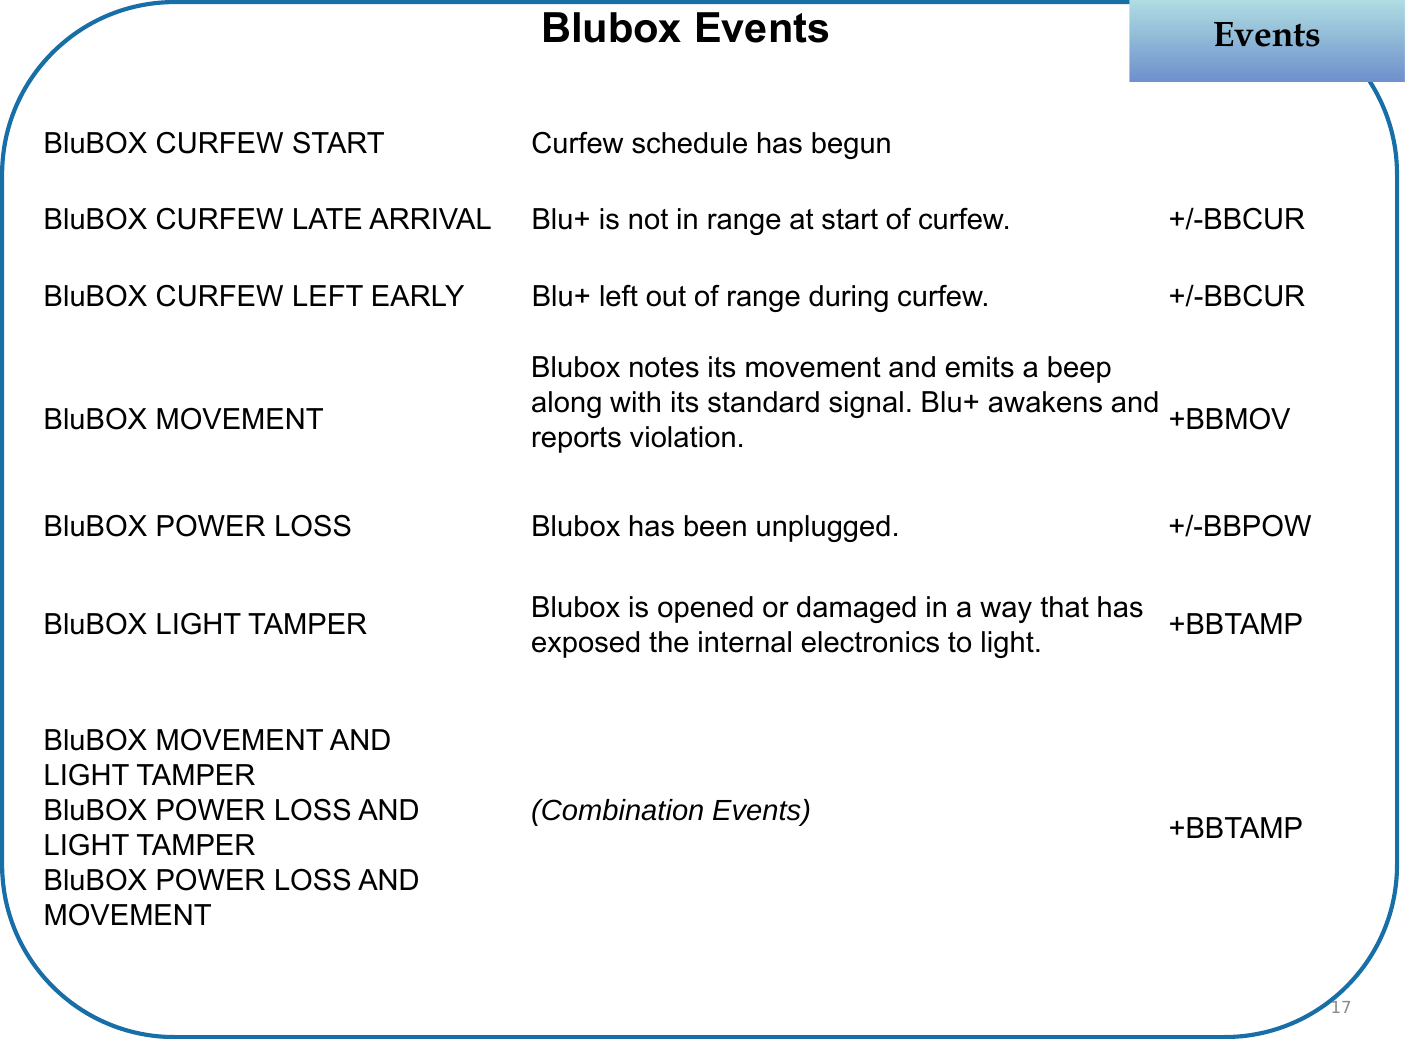 EventsEventsBlubox EventsBluBOX CURFEW START Curfew schedule has begunBluBOX CURFEW LATE ARRIVAL Blu+ is not in range at start of curfew. +/-BBCURBluBOX CURFEW LEFT EARLY Blu+ left out of range during curfew. +/-BBCURBluBOX MOVEMENTBlubox notes its movement and emits a beep along with its standard signal. Blu+ awakens and reports violation. +BBMOVBluBOX POWER LOSS Blubox has been unplugged. +/-BBPOWBluBOX LIGHT TAMPER Blubox is opened or damaged in a way that has exposed the internal electronics to light. +BBTAMPBluBOX MOVEMENT ANDLIGHT TAMPERBluBOX POWER LOSS ANDLIGHT TAMPERBluBOX POWER LOSS AND MOVEMENT(Combination Events) +BBTAMP17